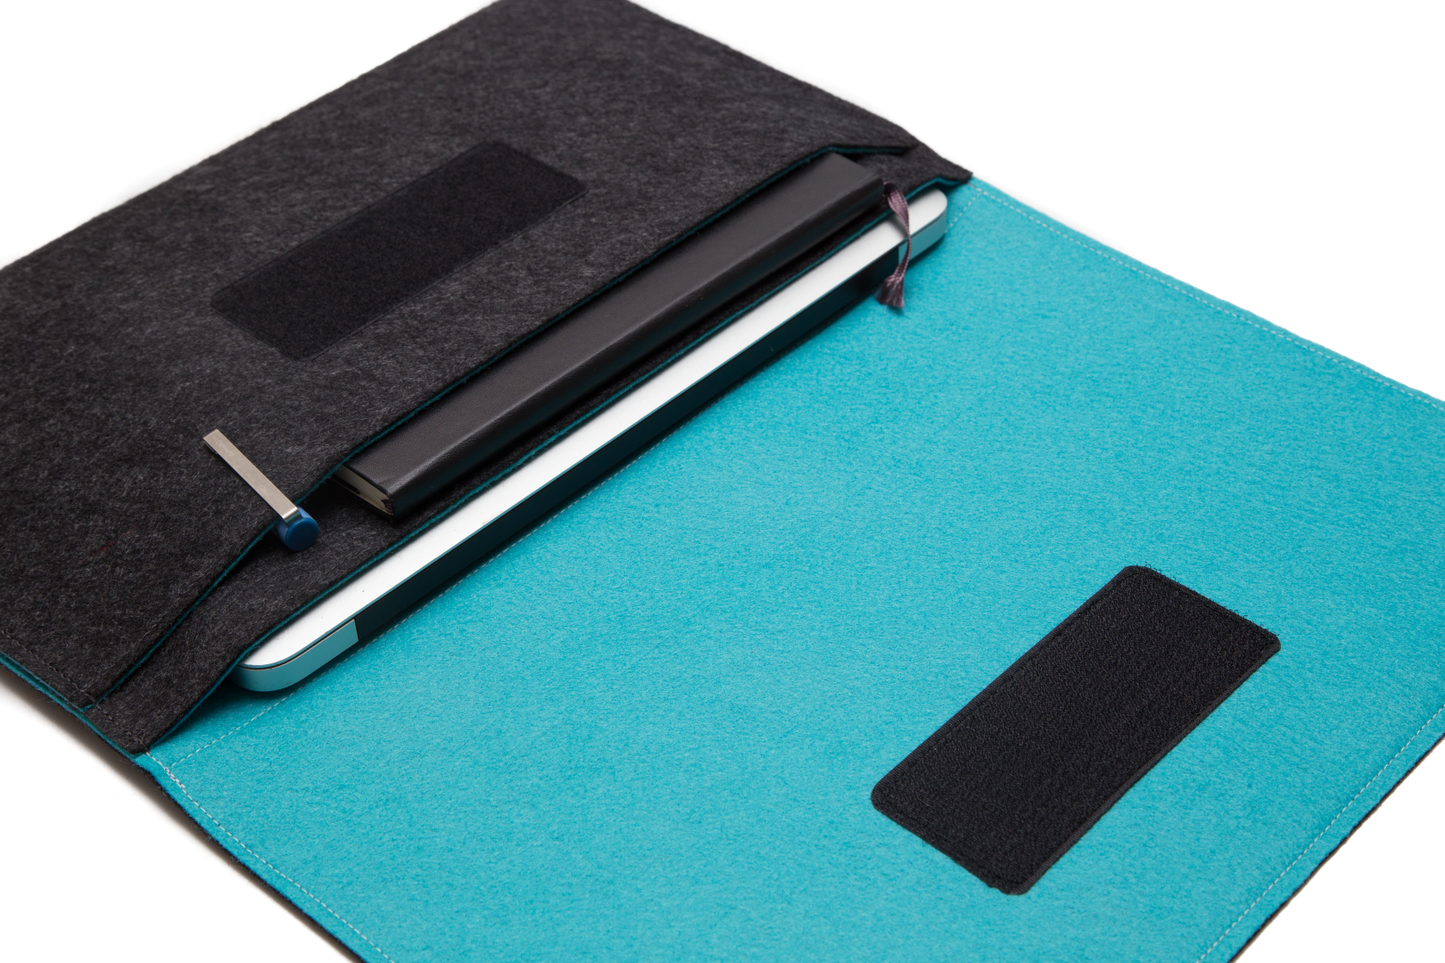 Handmade MacBook Cover with Accessories Pocket: Charcoal & Turquoise